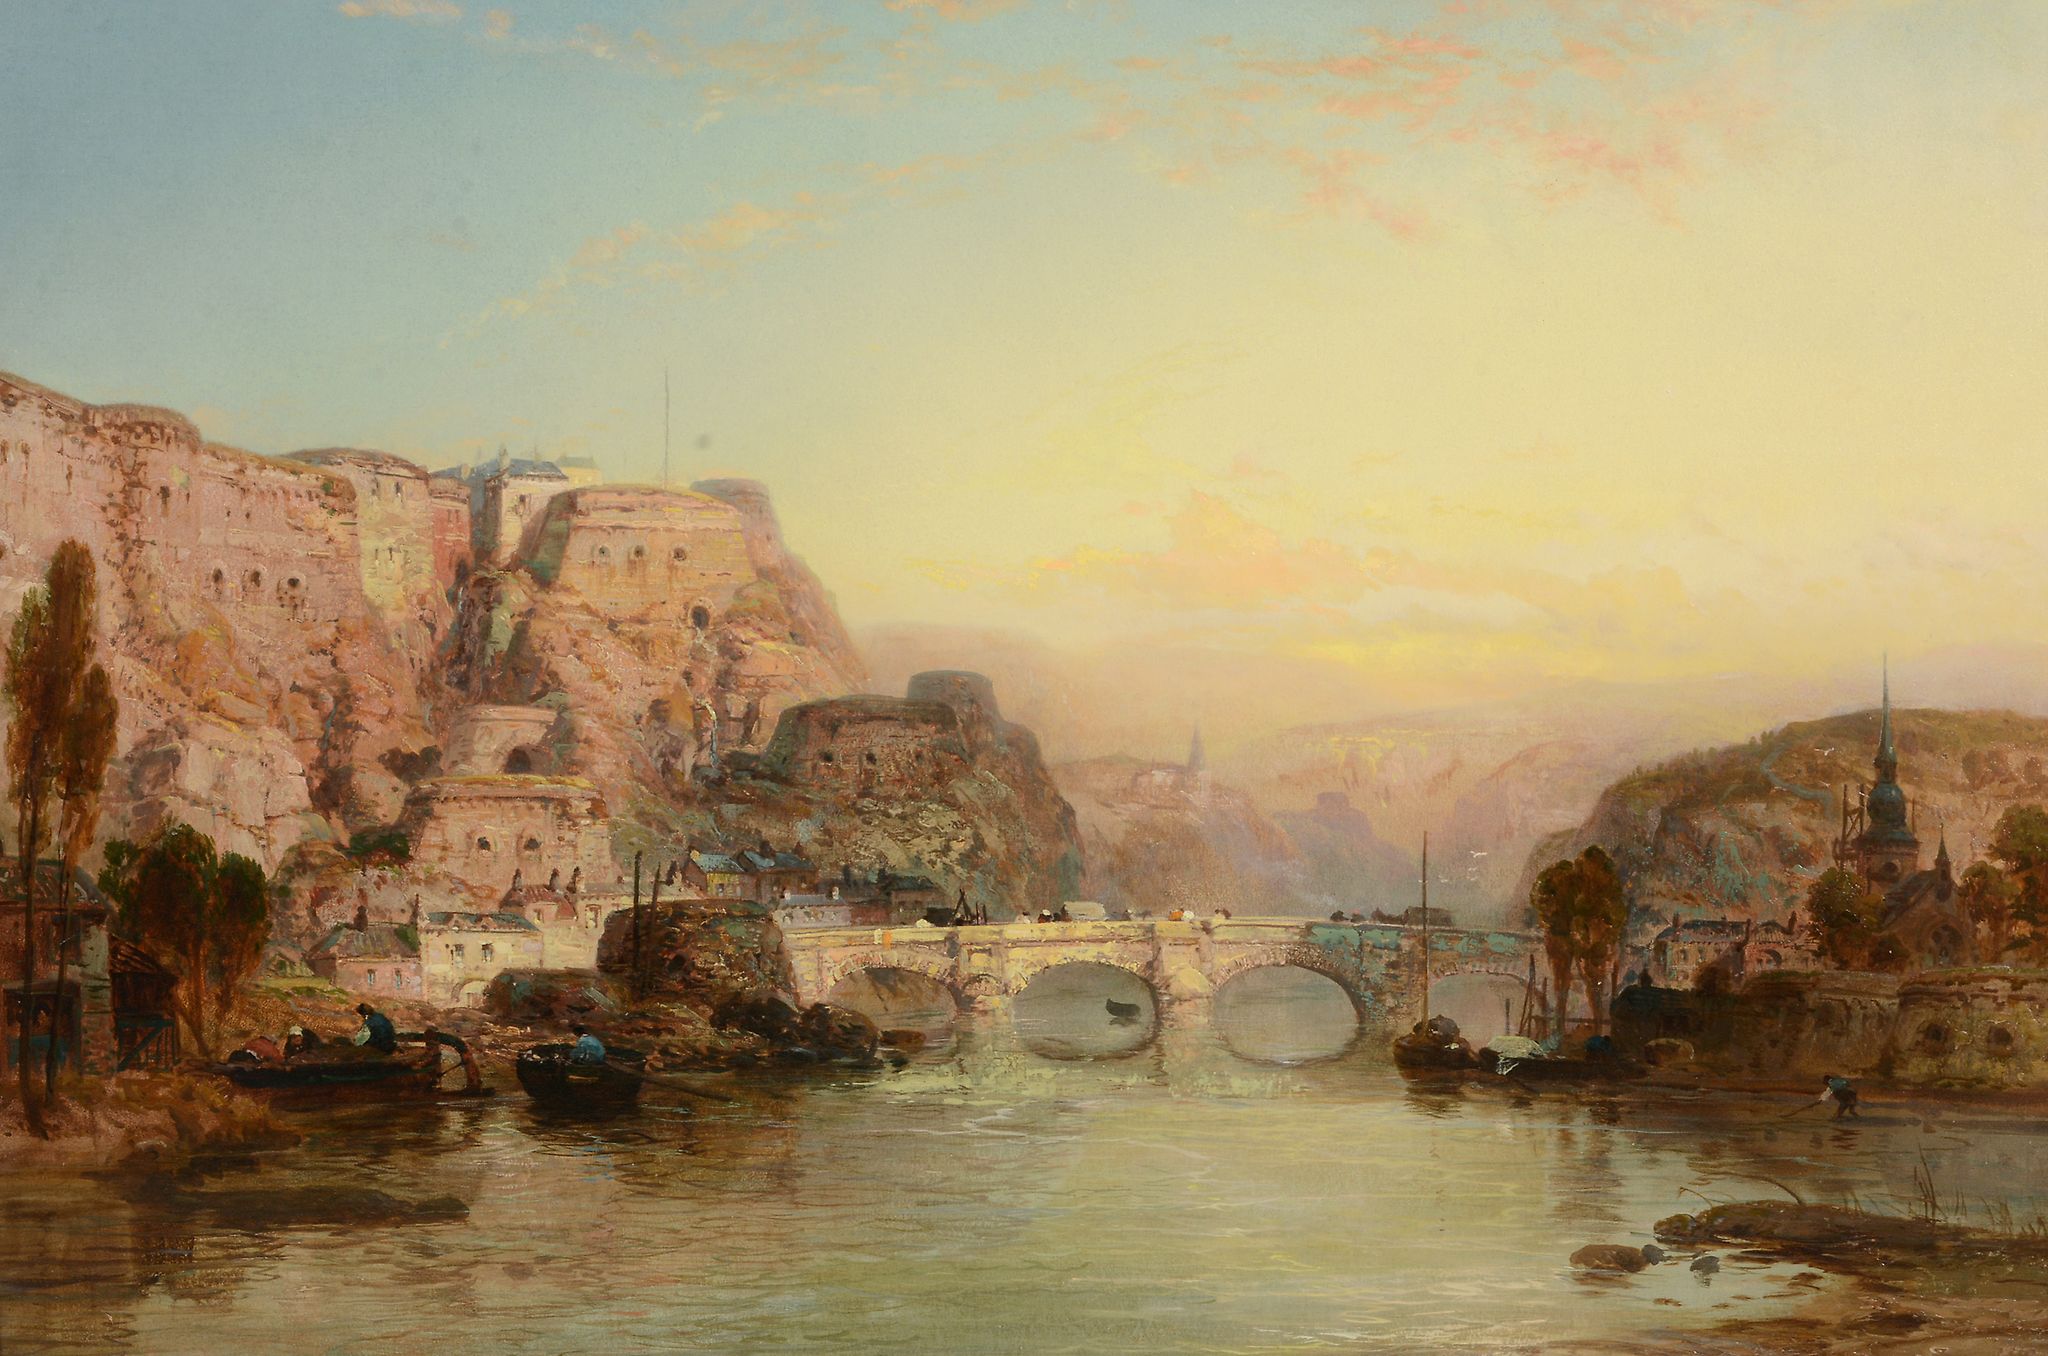 James Webb (1825-1895) - Givet on the Meuse Oil on canvas 63.5 x 94 cm. (25 x 37 in)